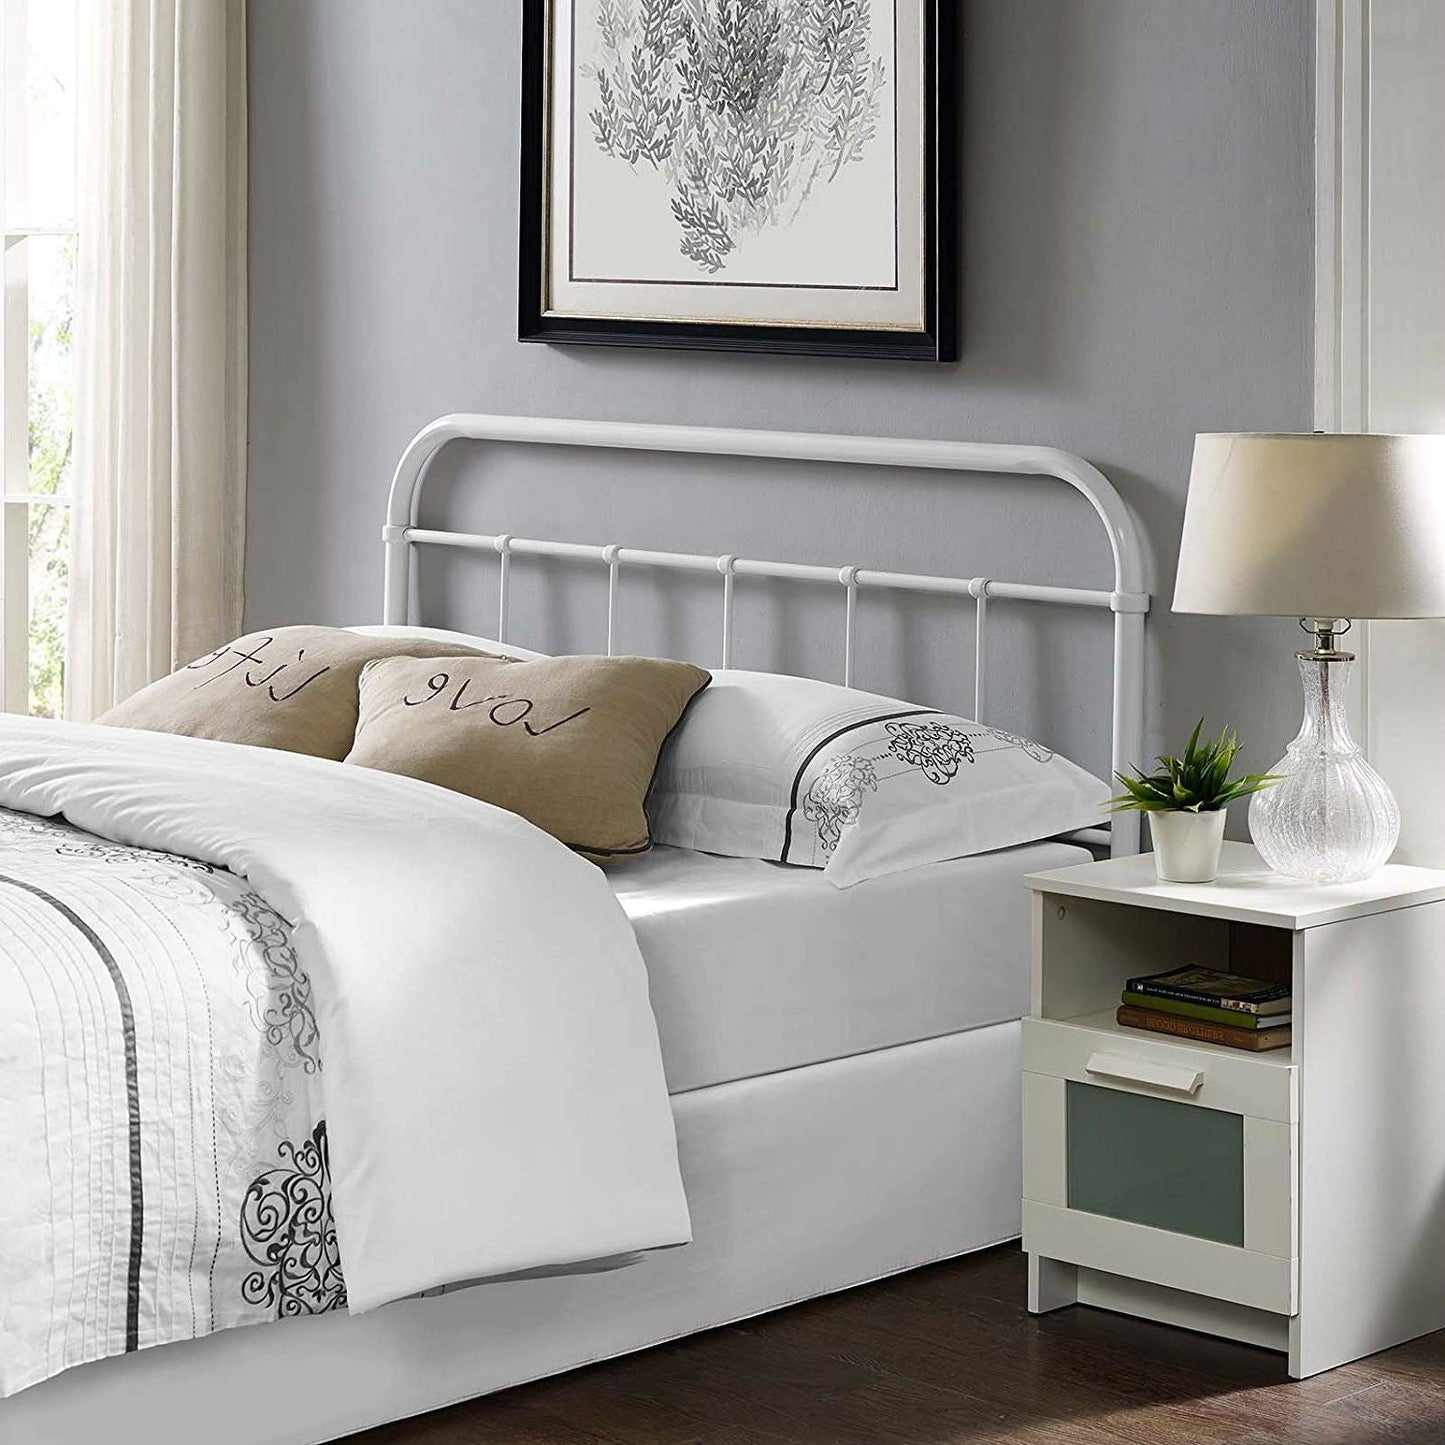 Bedroom > Headboards - Full Size Vintage White Metal Headboard With Round Corners